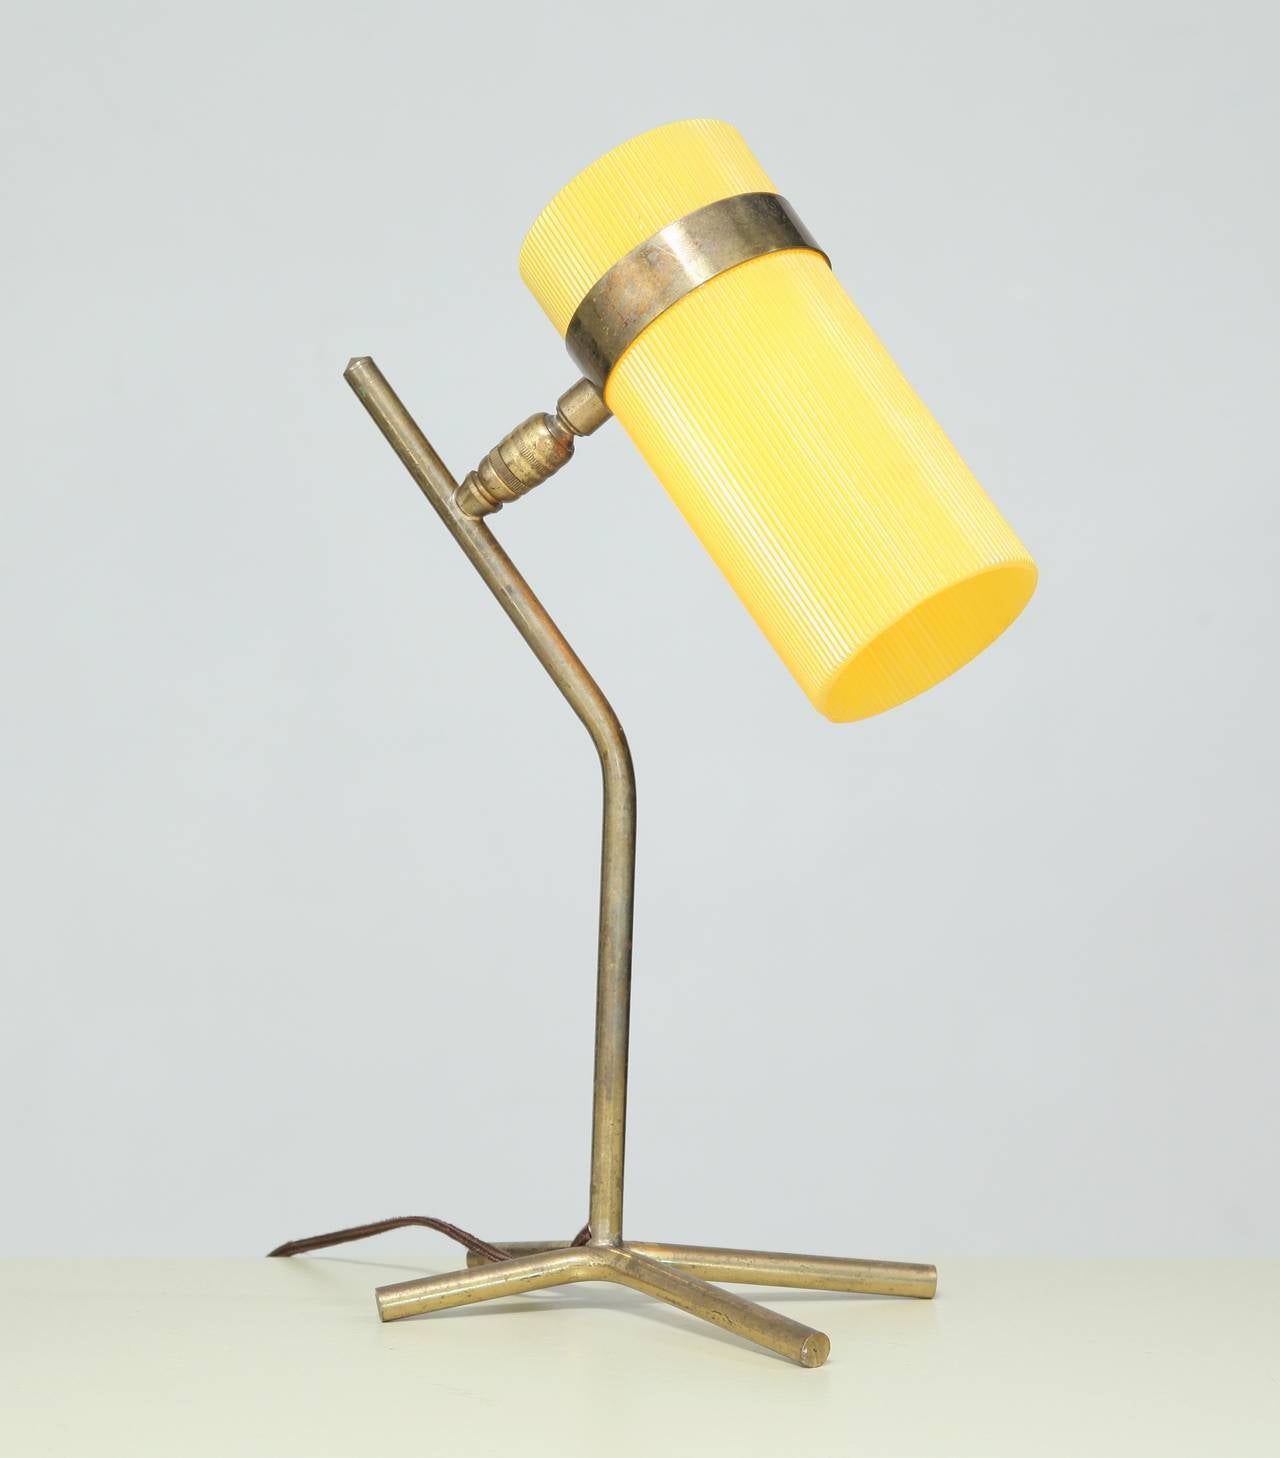 A petite French table lamp reminiscent of the work of Boris Lacroix and Pierre Guariche, made of a yellow plastic cylinder shade on brass feet. The ball construction allows the shade to be turned in any direction.